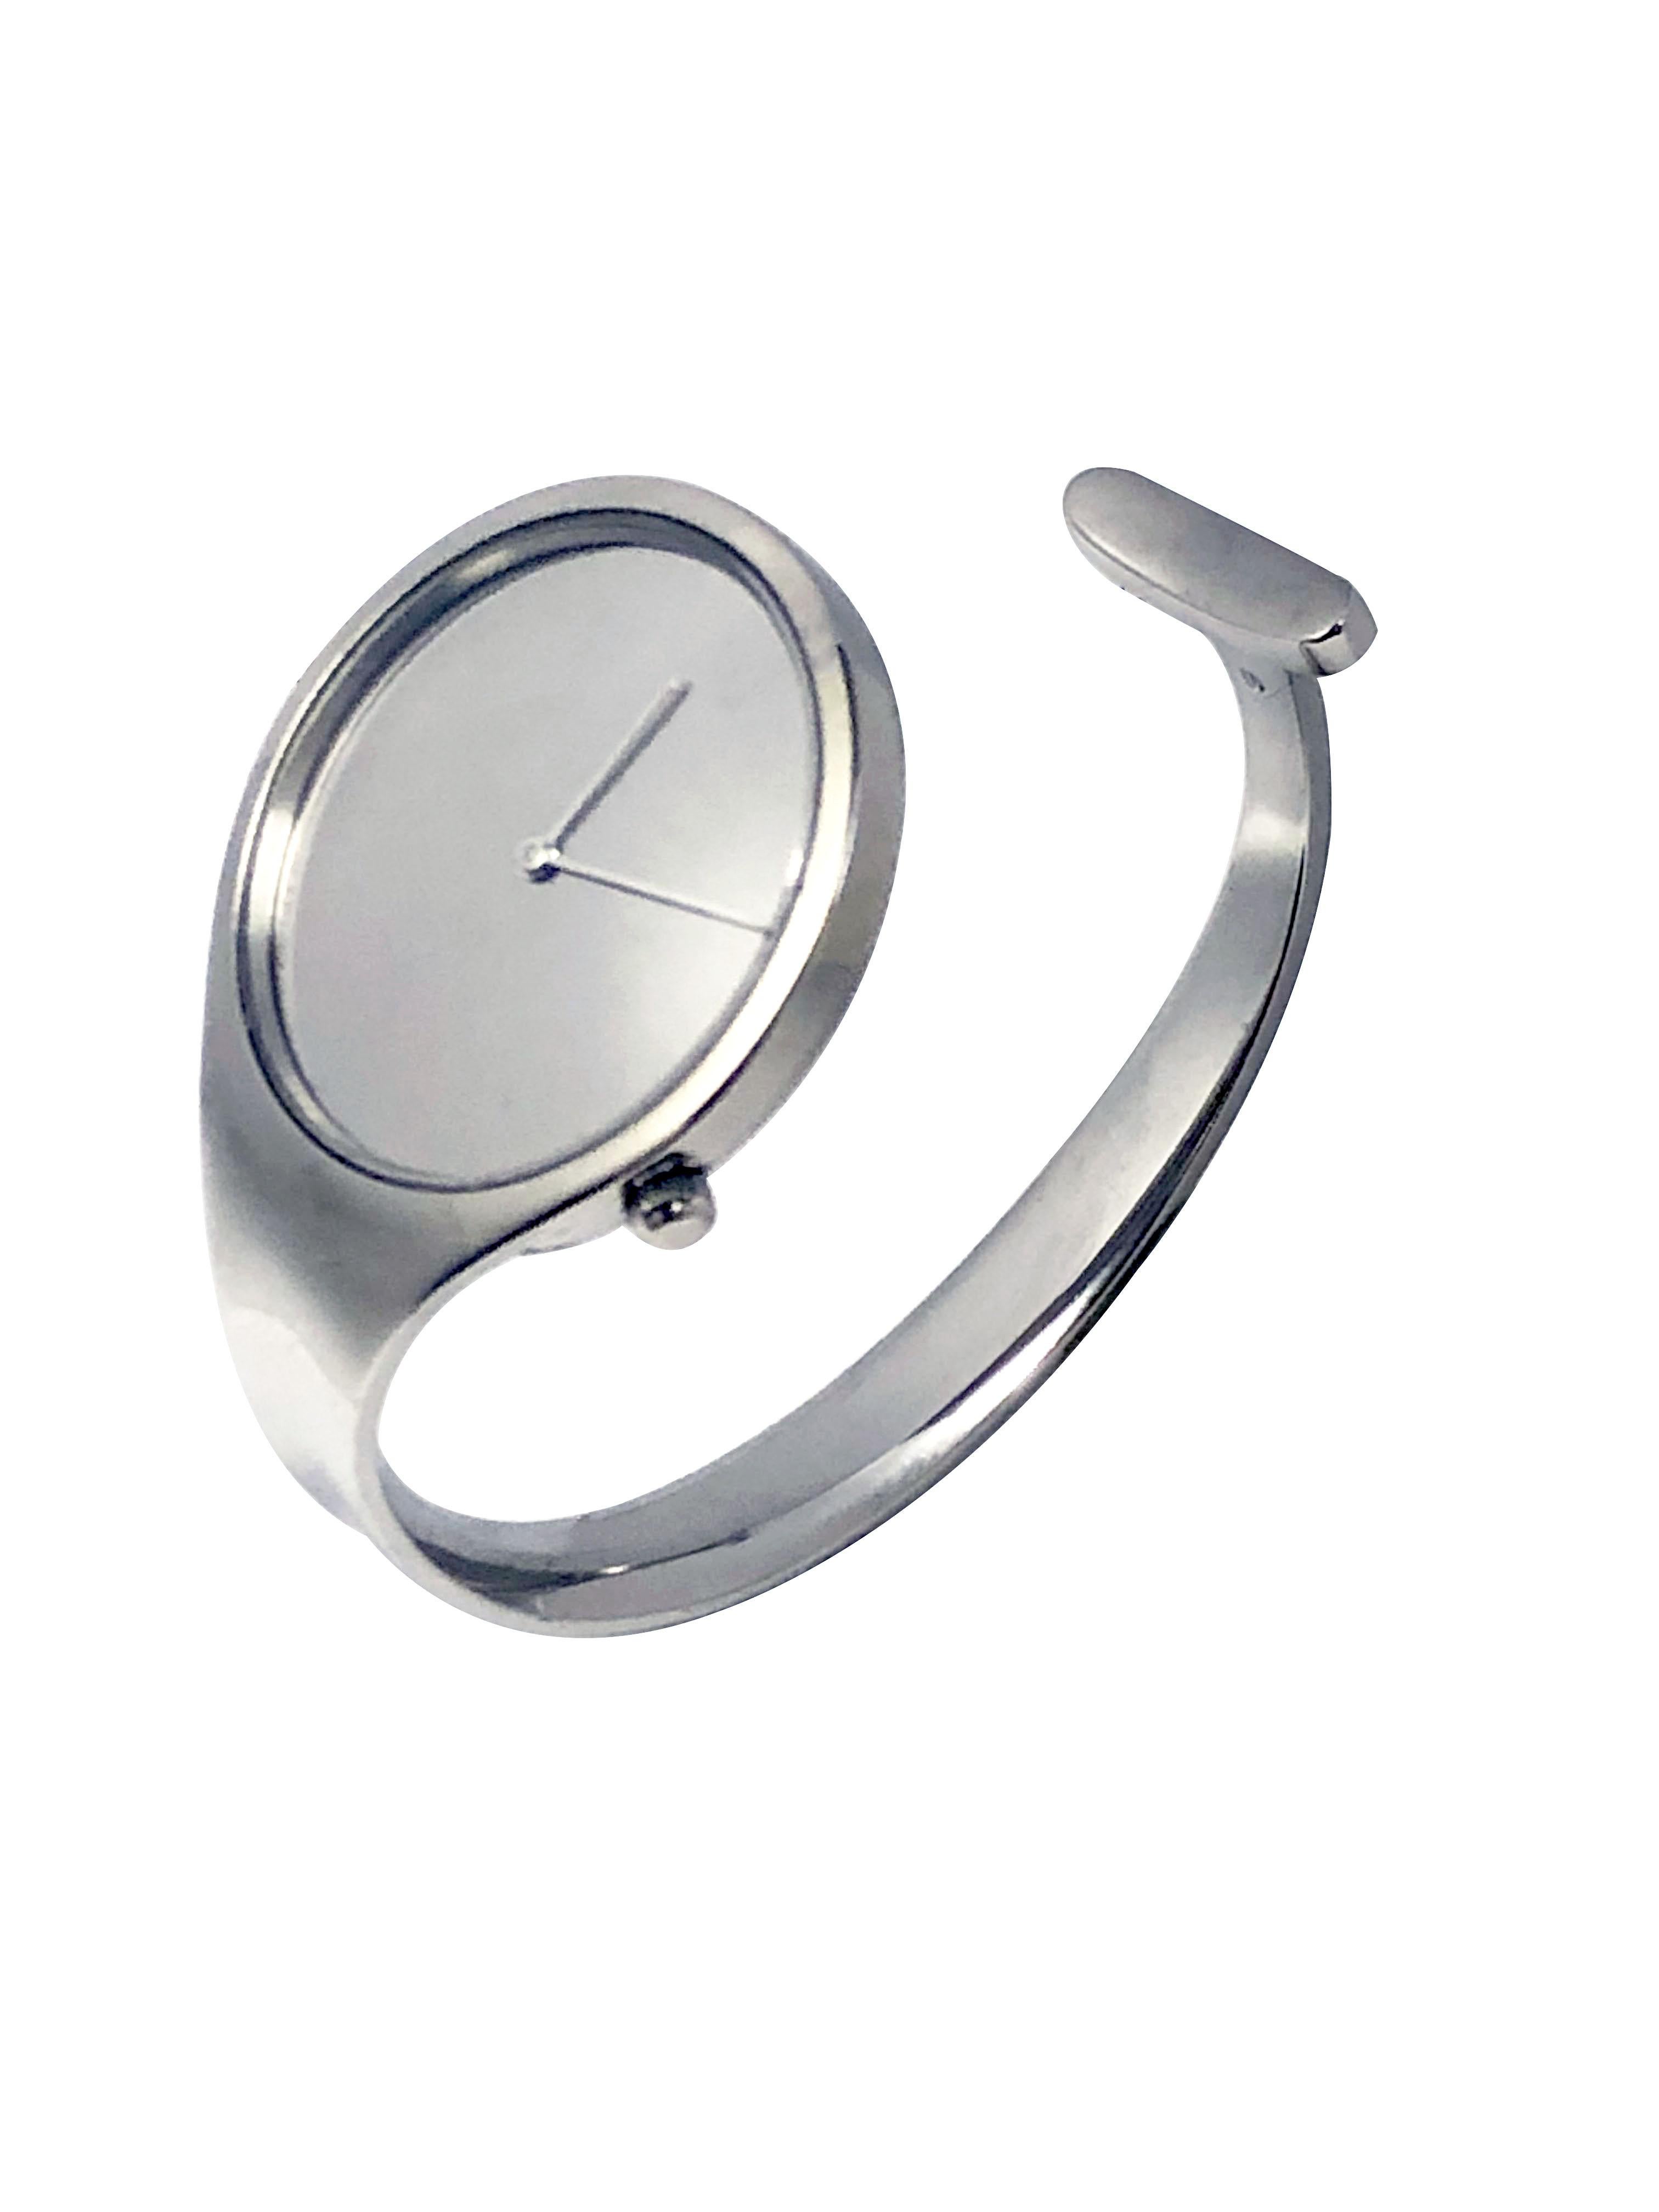 Circa 2005 Georg Jensen Vivianna Collection Ladies Wrist Watch, 26.5 MM Stainless Steel Water Resistant Case, 1/4 inch wide Stainless Steel Bracelet with an inside measurement of 6 1/2 inch and a 1 inch wide opening that will fit most wrists. Silver